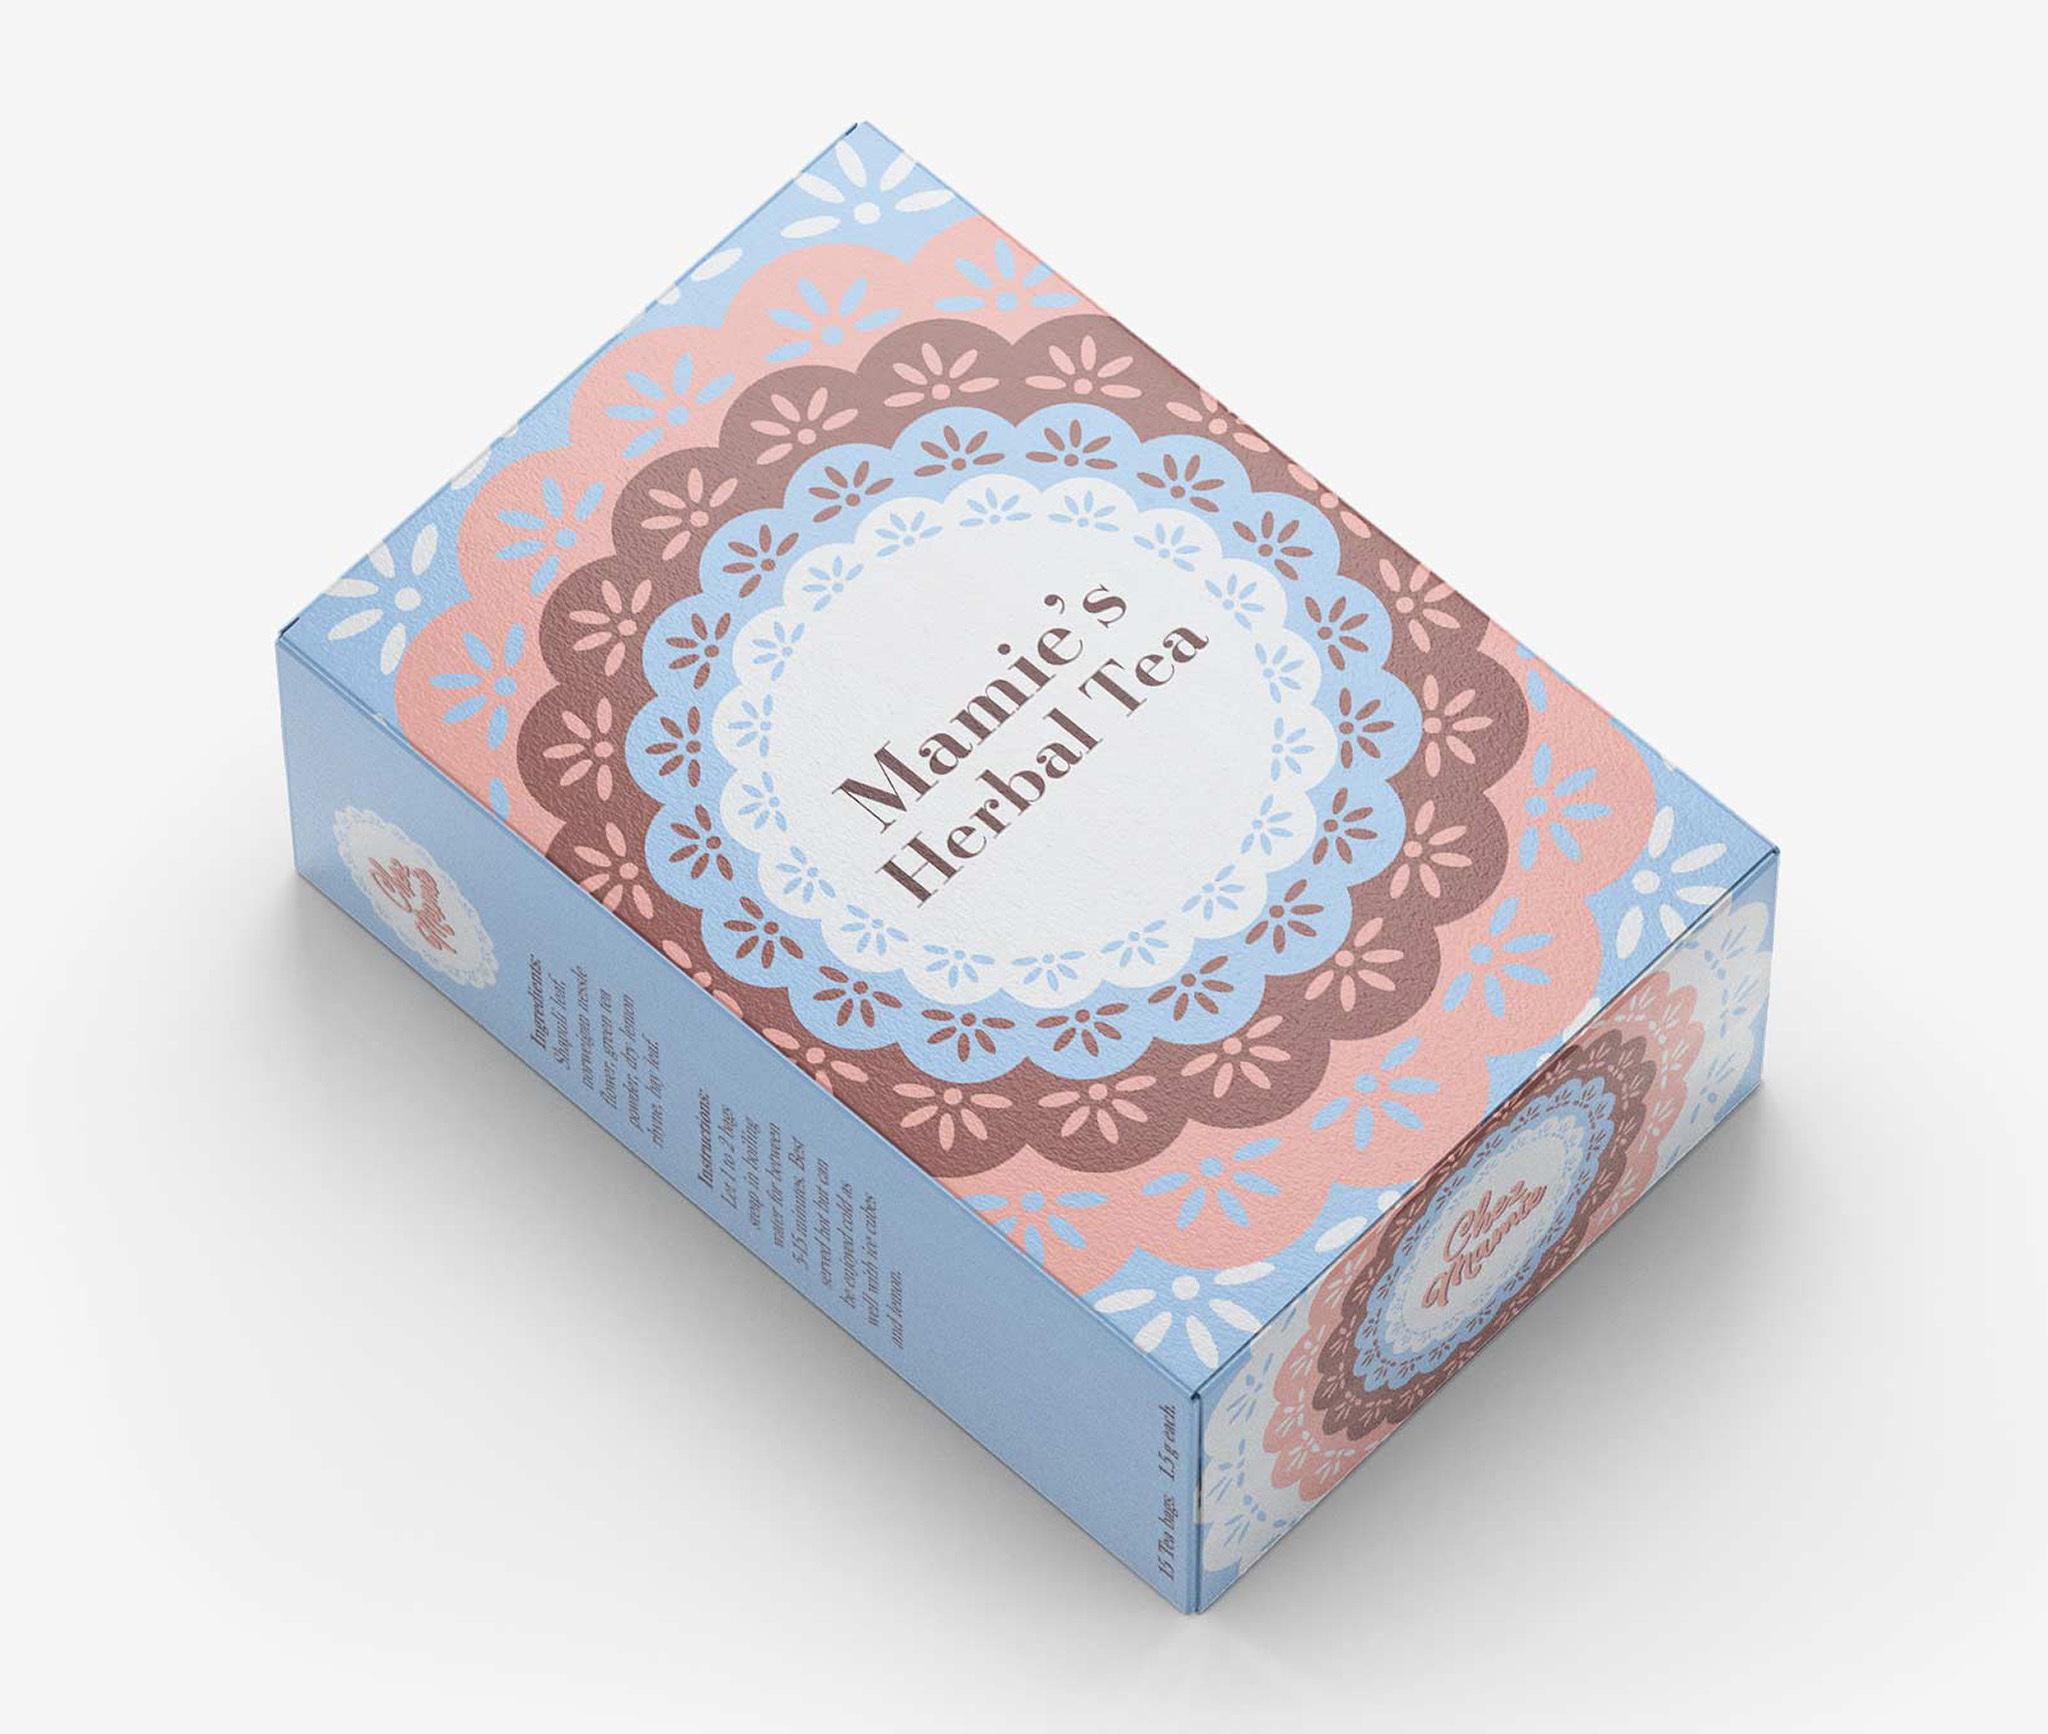 Mockup of packaging design for tea box or fictional company Chez Mamie. The design features a circular doily pattern in different colours and the text "Mamie's Herbal Tea" at the centre.